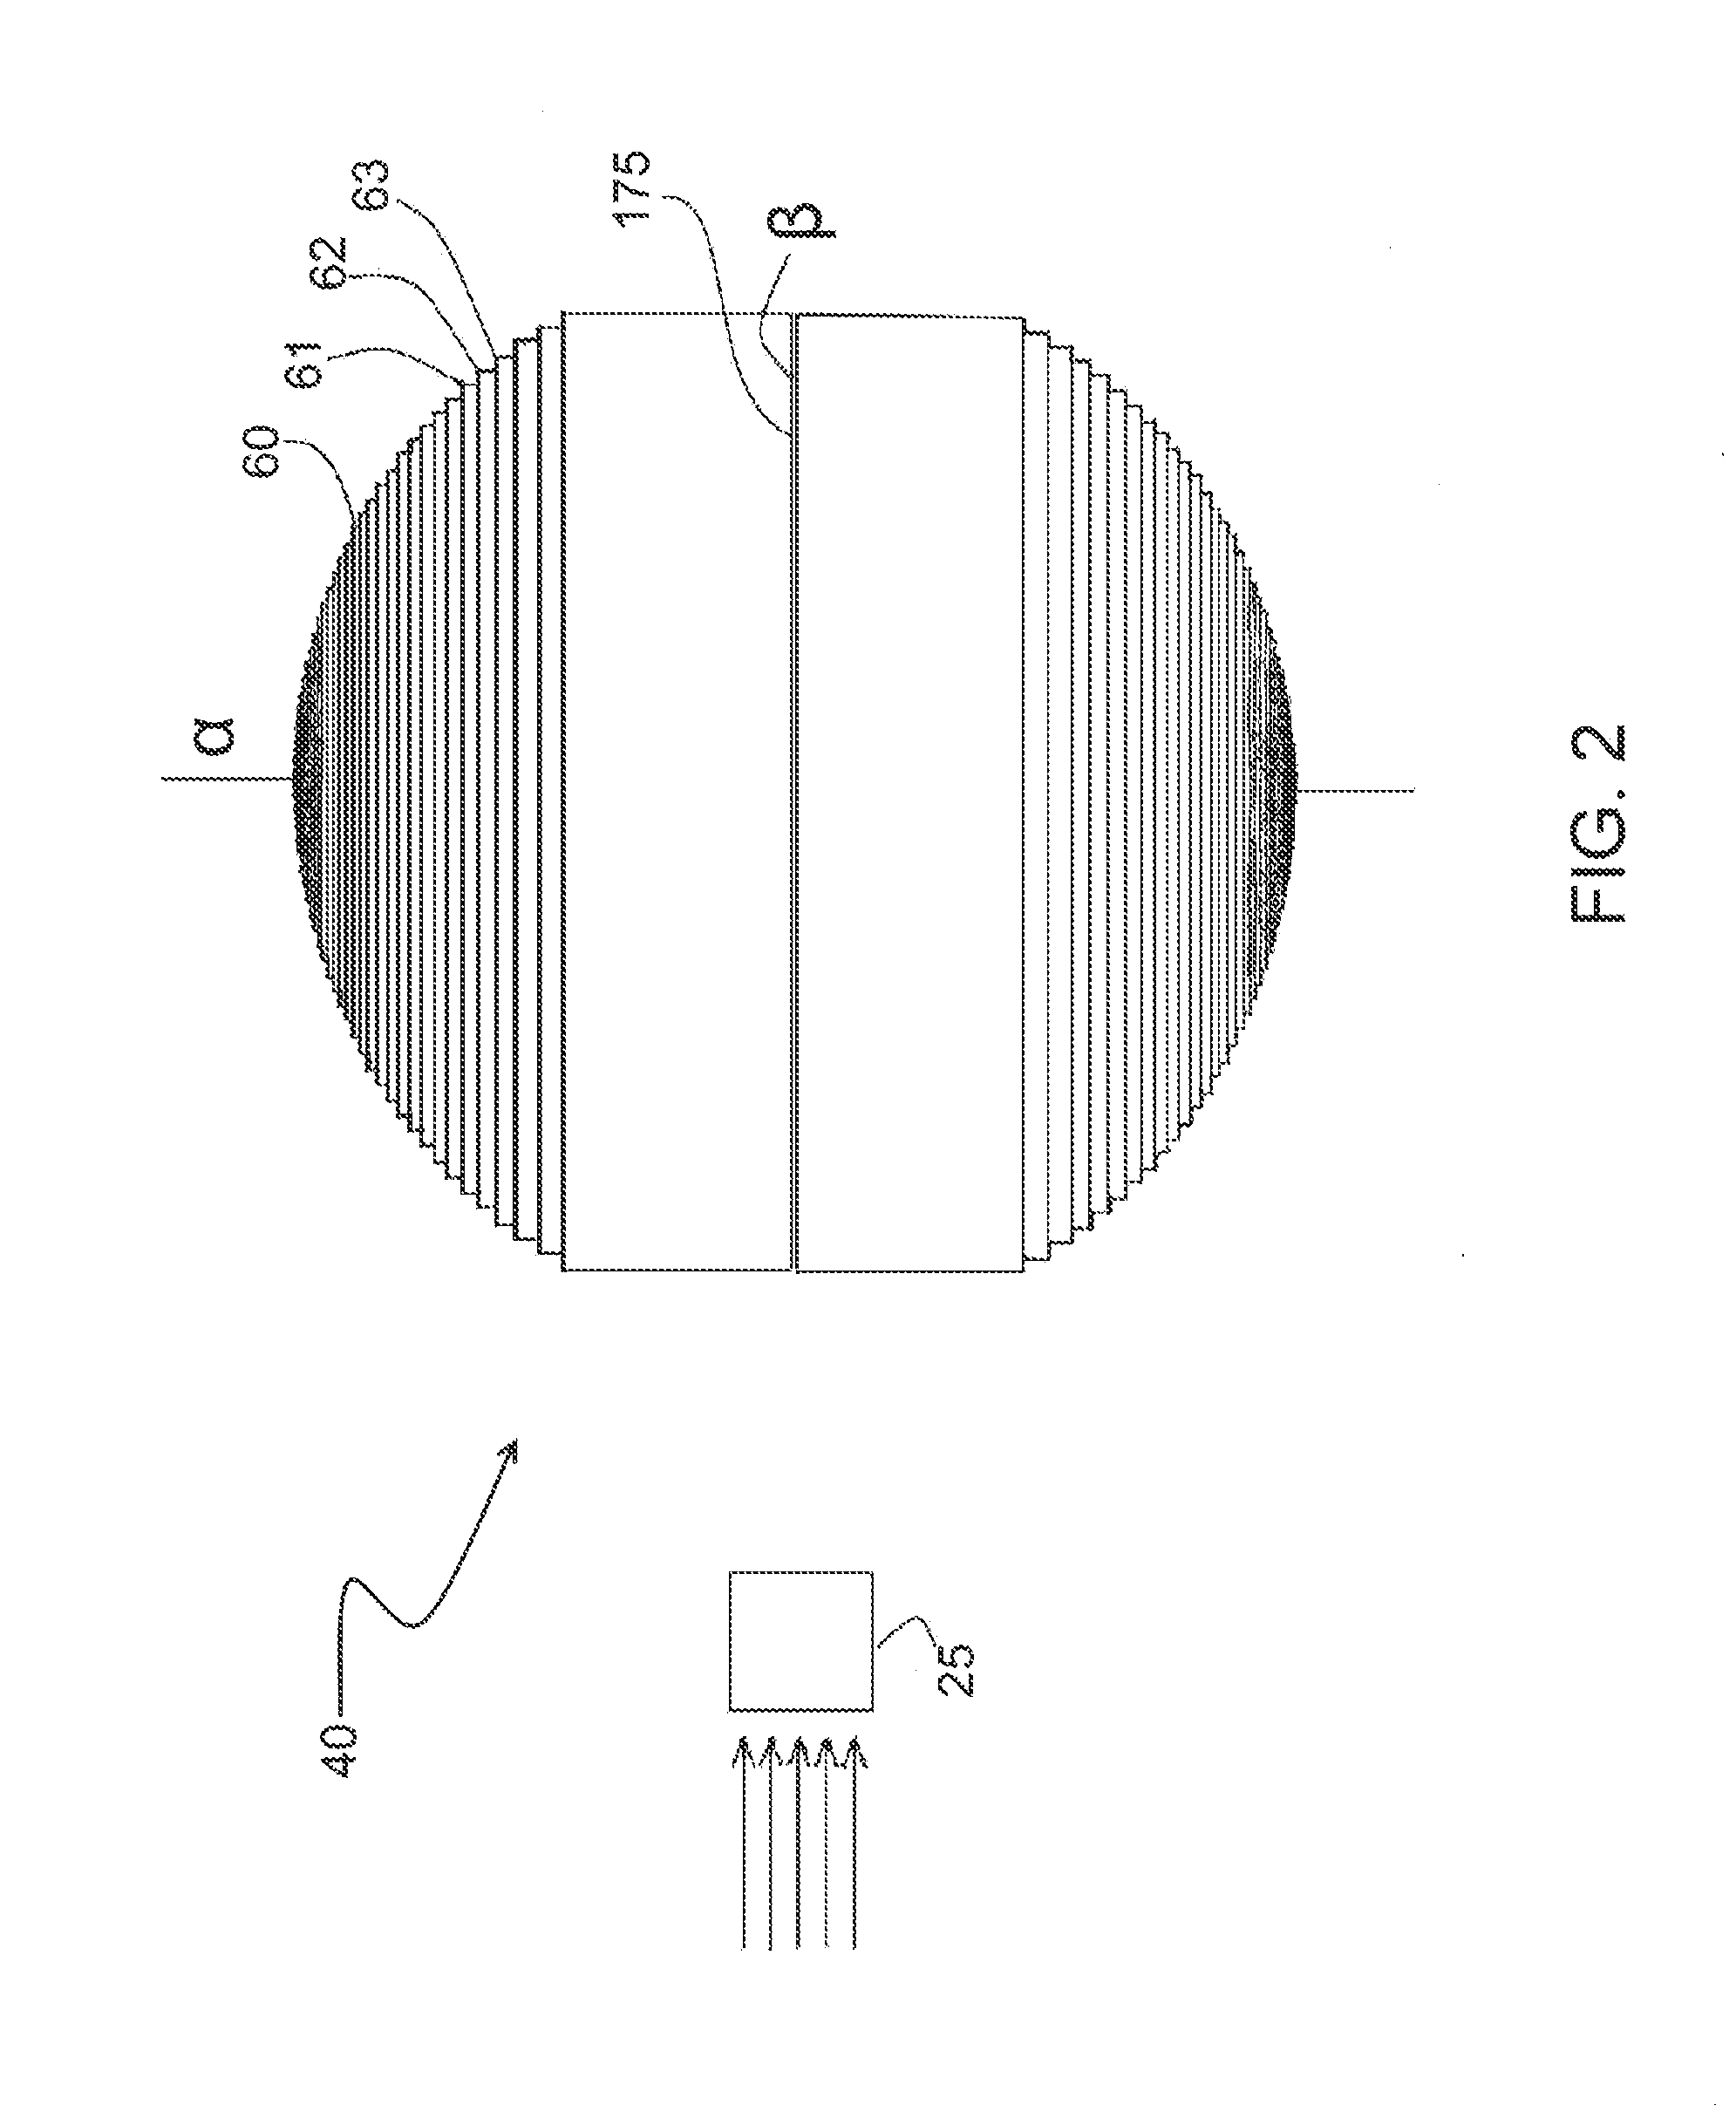 Accelerator-based method of producing isotopes